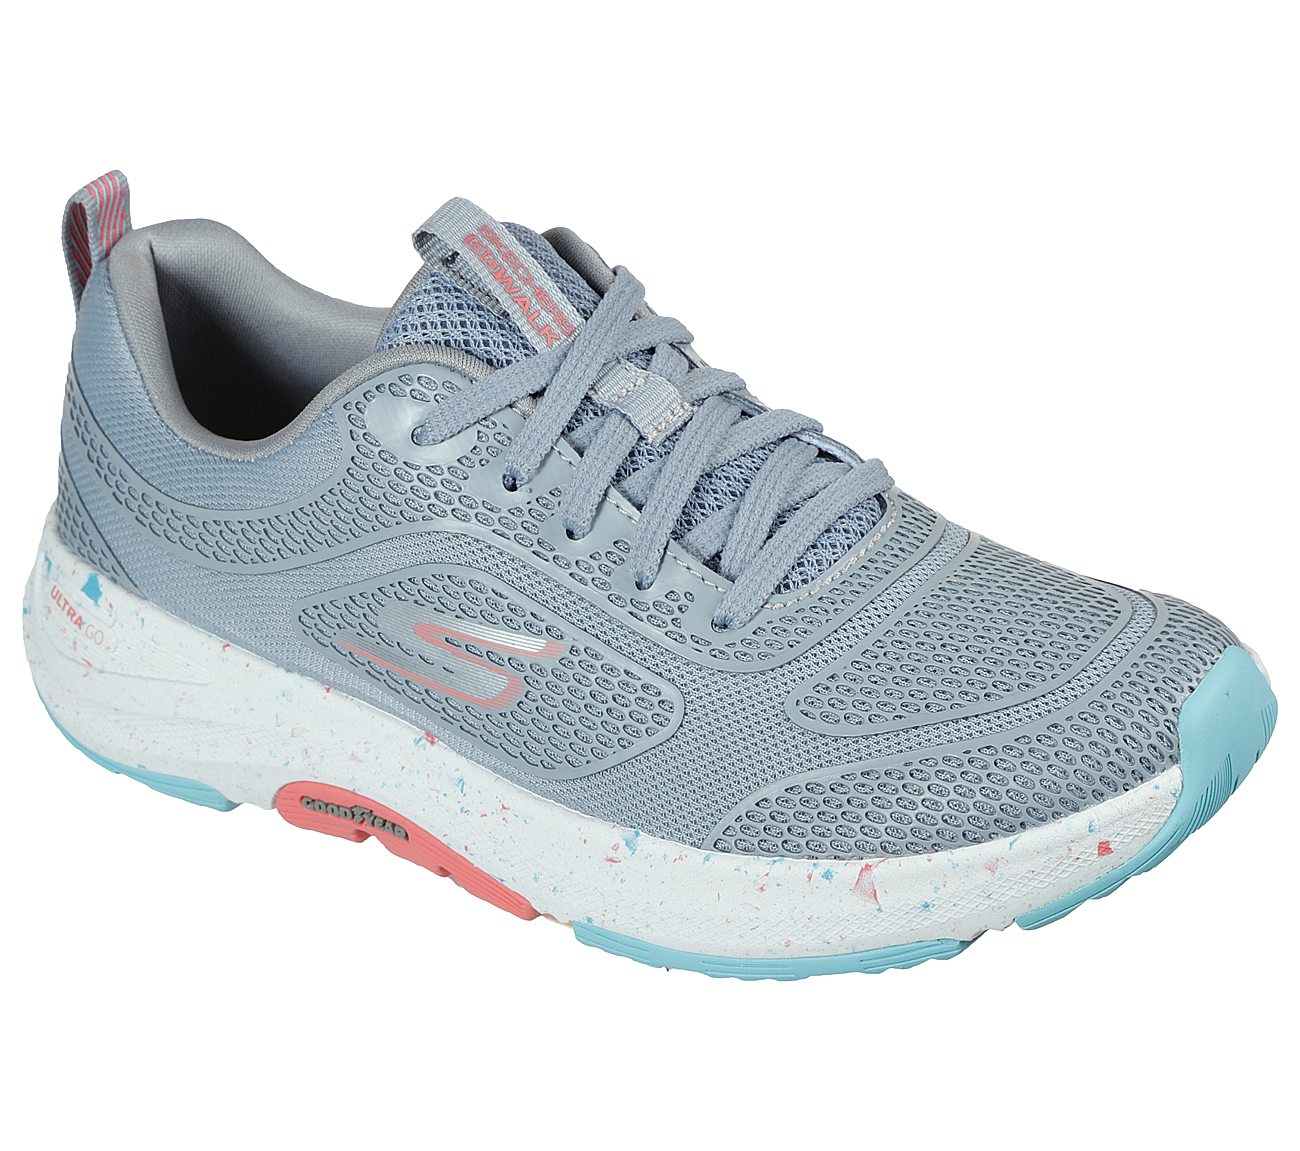 where to buy skechers performance shoes